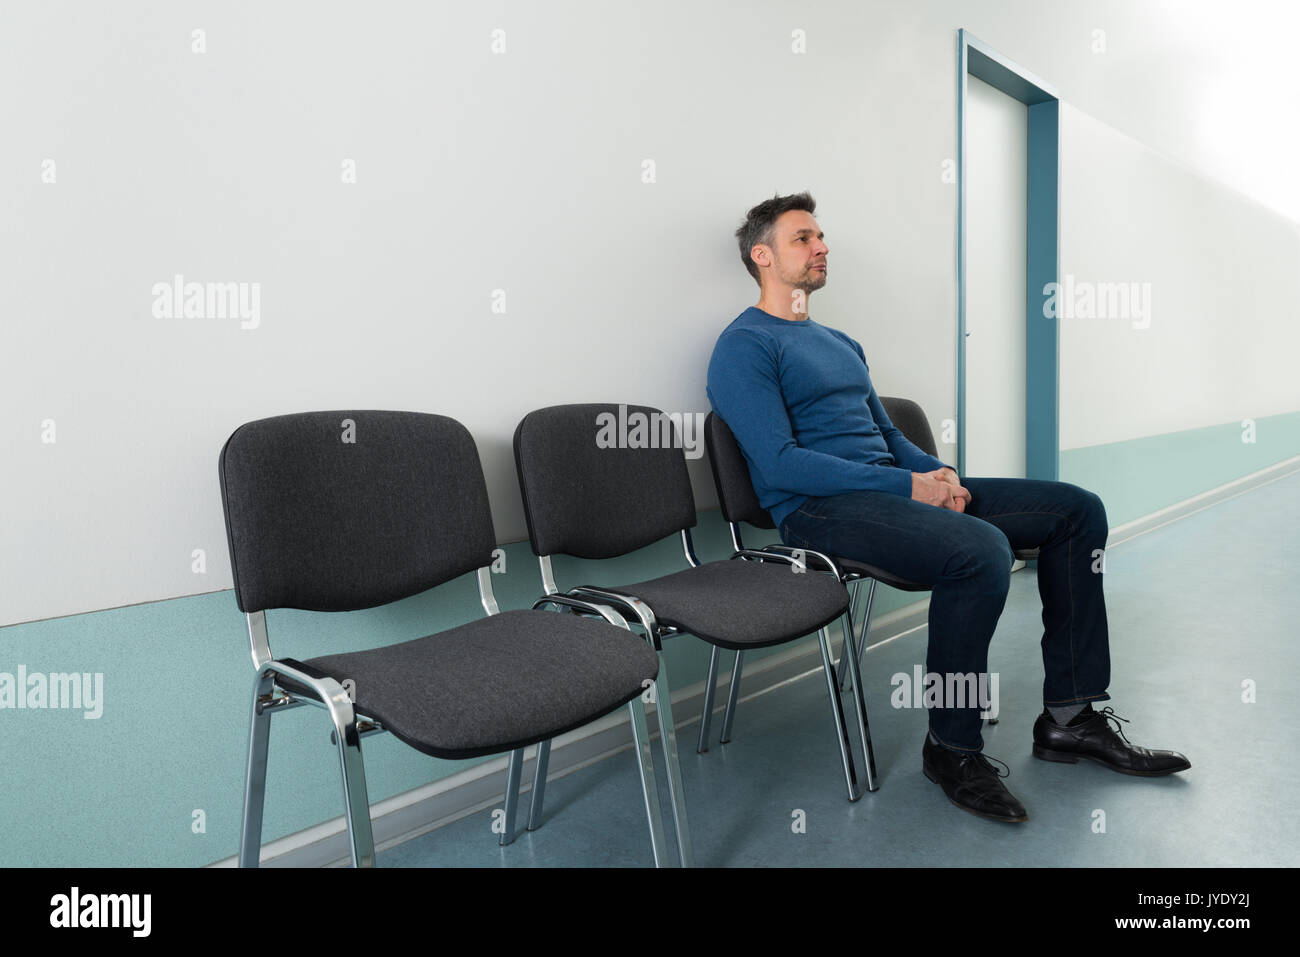 Portrait Of A Mid-adult Man Sitting On Chair In Hospital Stock Photo